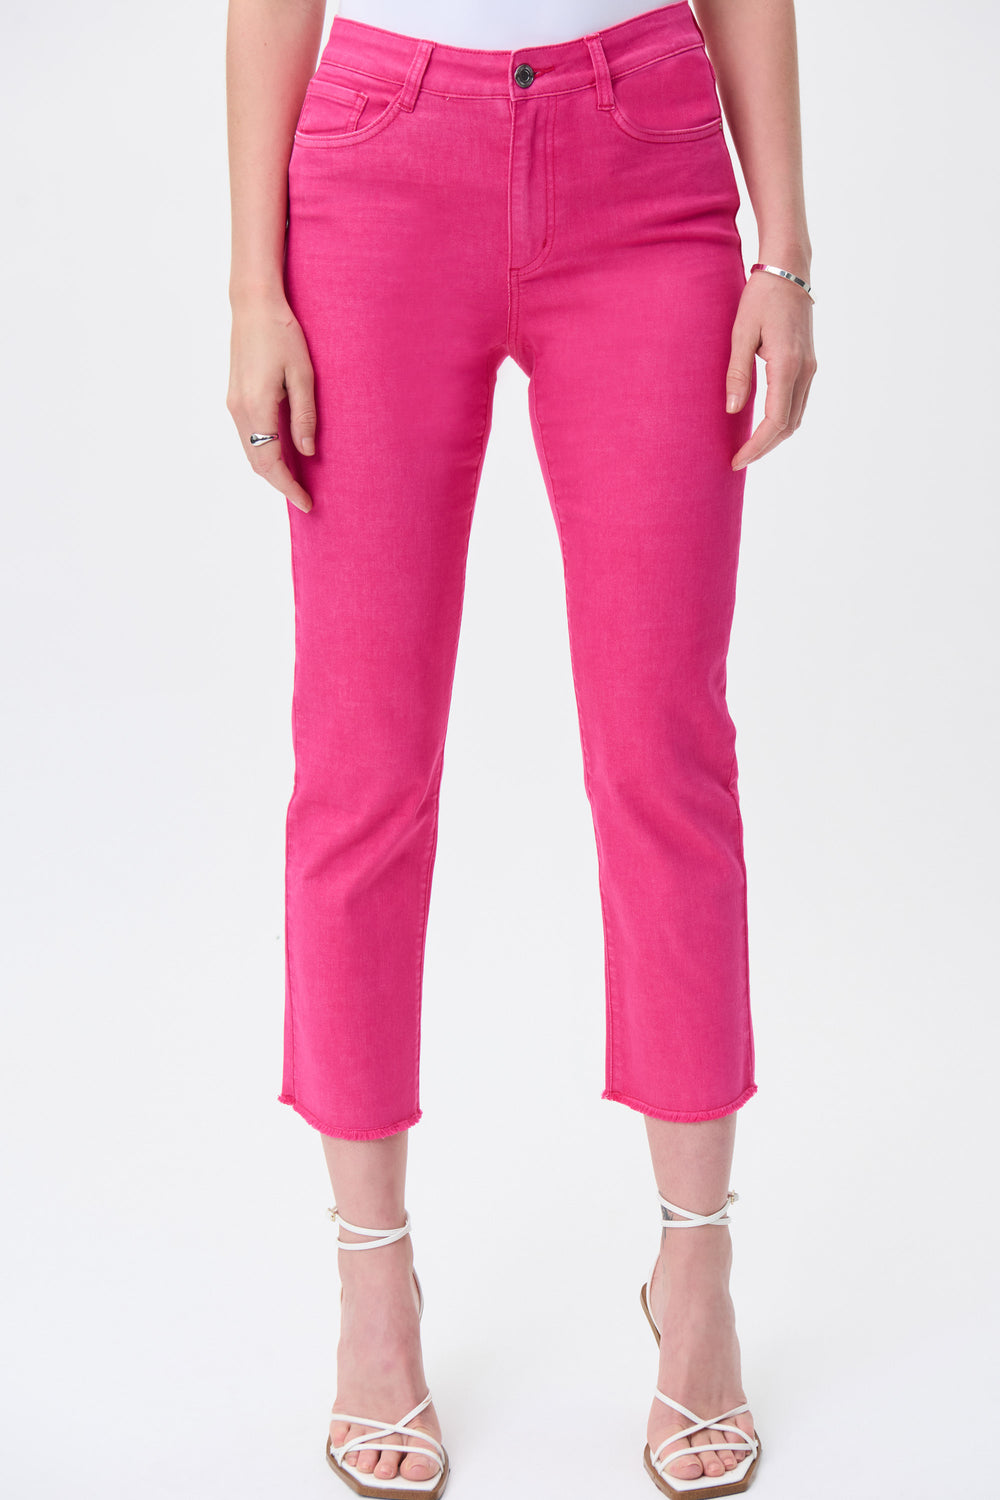 JOSEPH RIBKOFF SPRING 2023 women's casual colourful slim cropped jeans with frayed hem - pink front